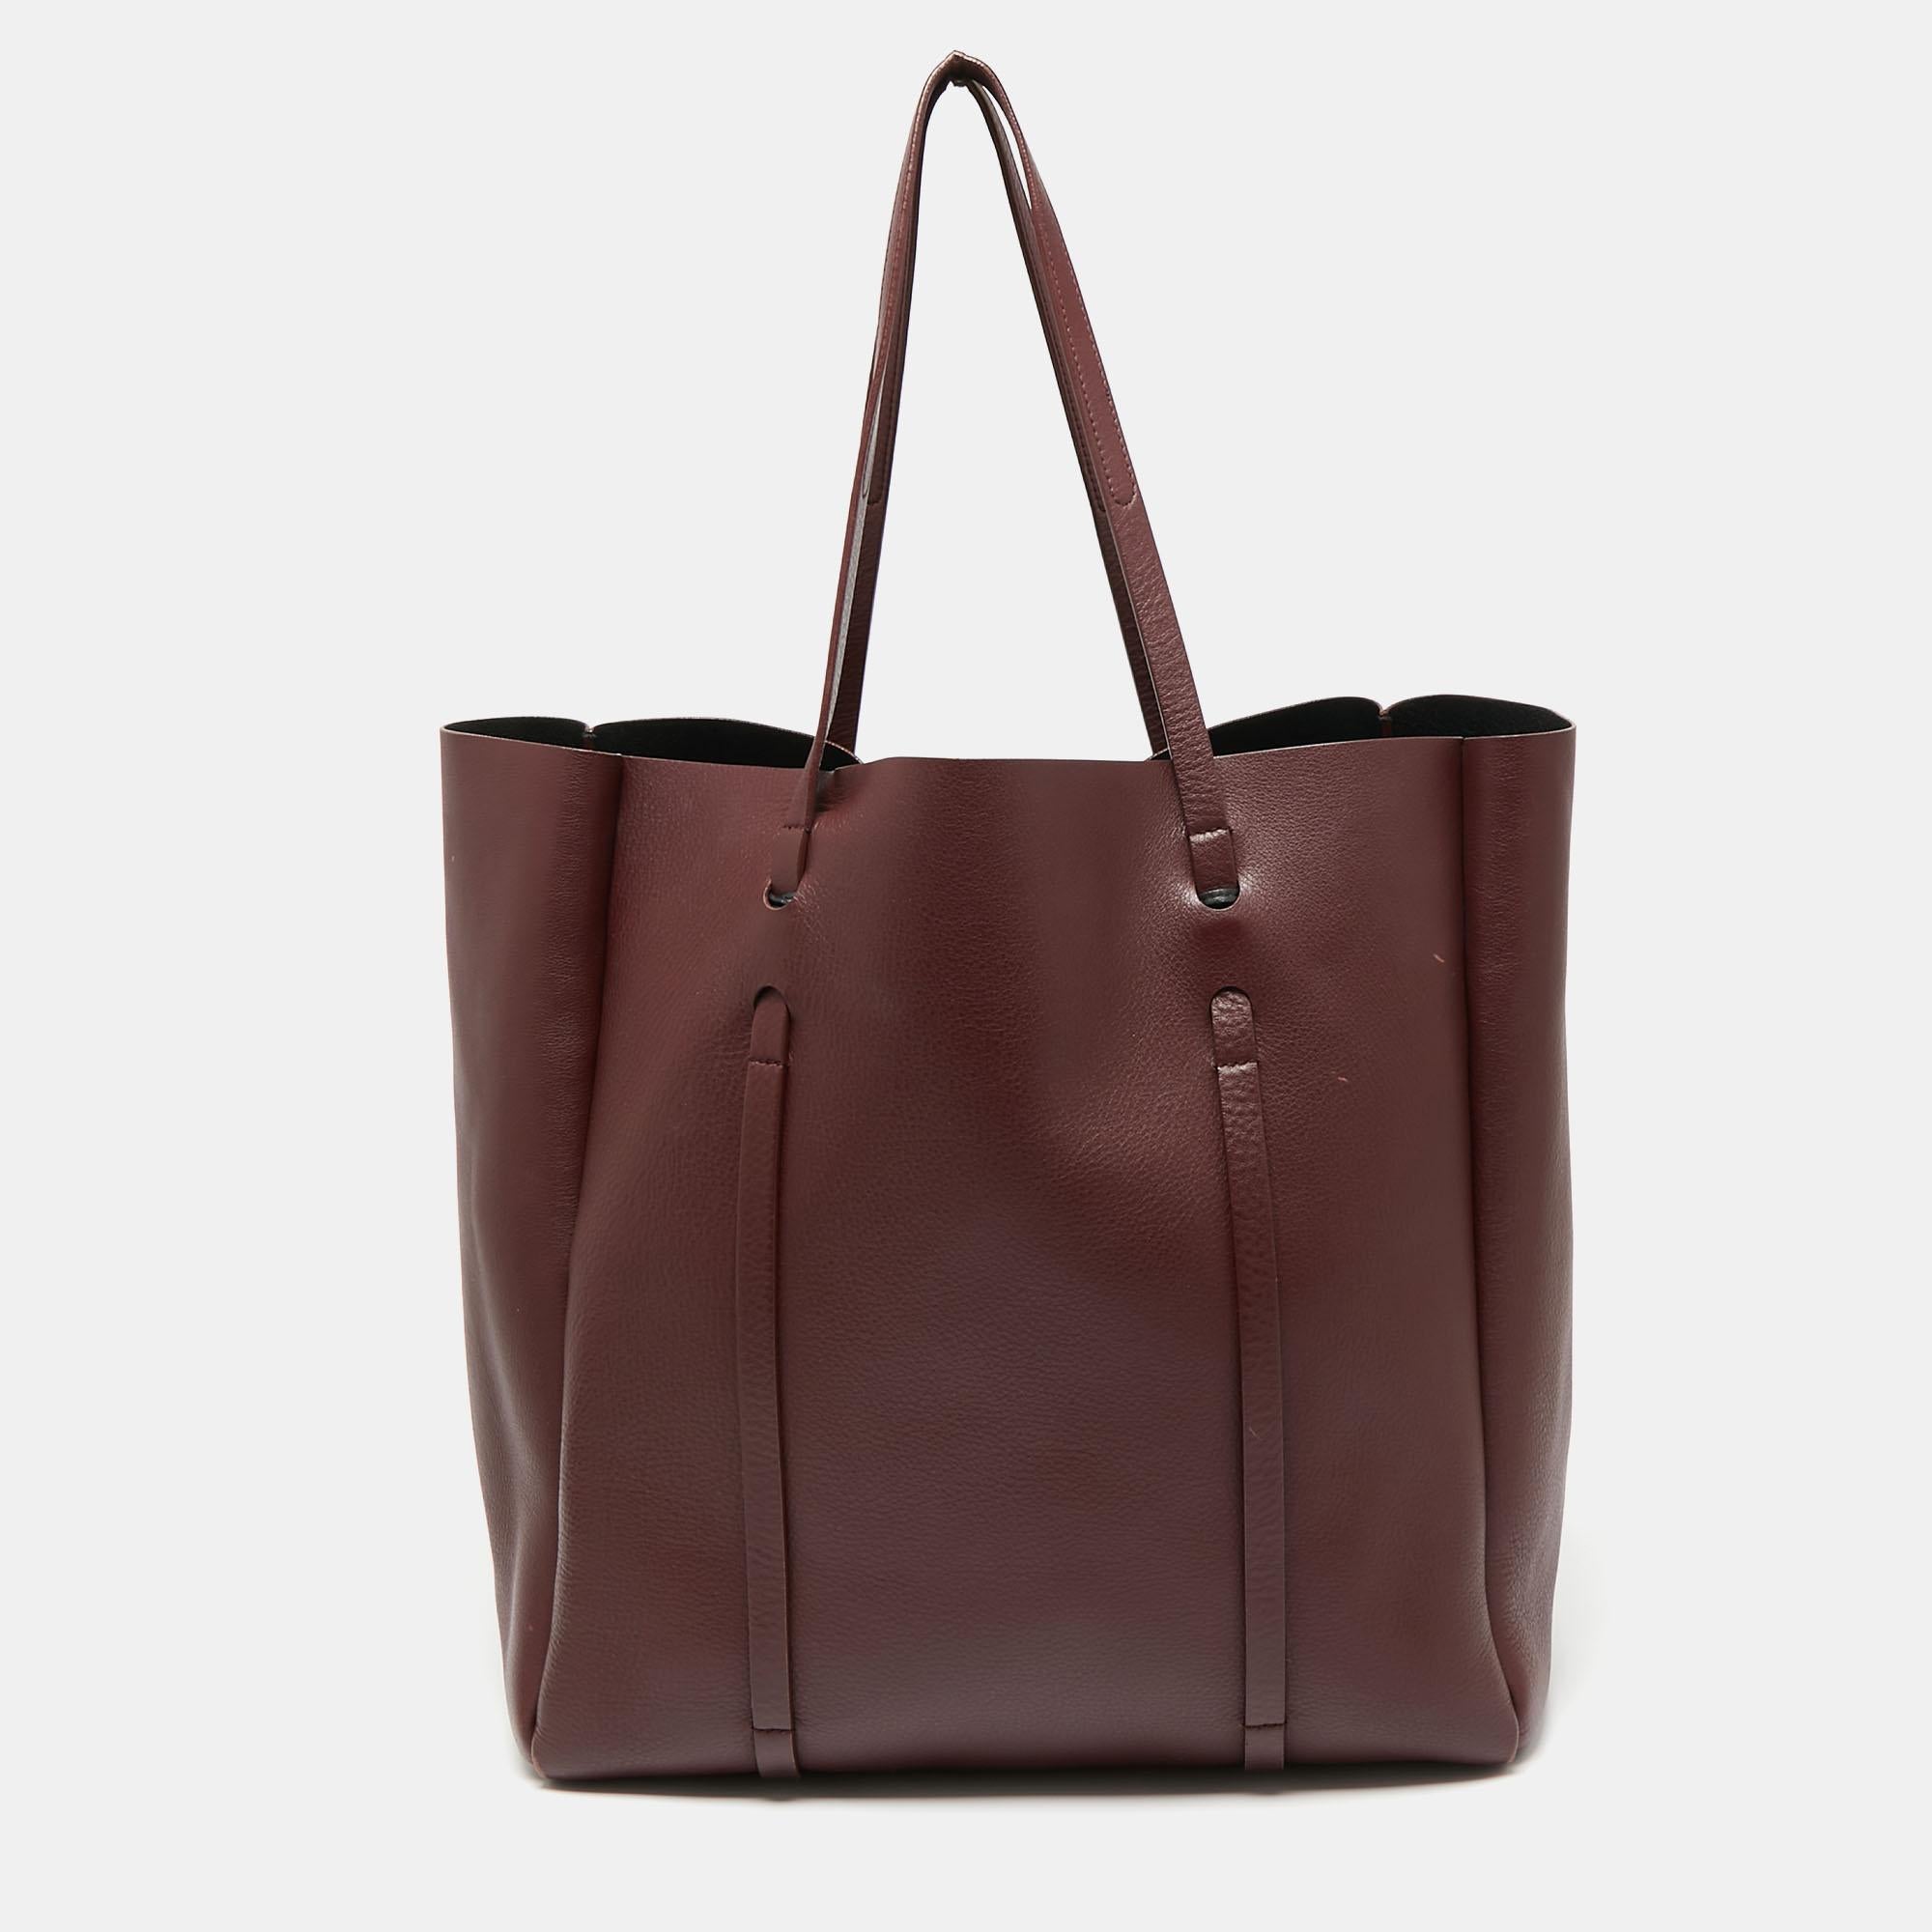 As the name suggests, this Everyday tote from Balenciaga is perfect for everyday use. Crafted from burgundy leather, the bag features two shoulder straps and the brand logo on the front. The tote opens to a spacious leather-lined interior that has